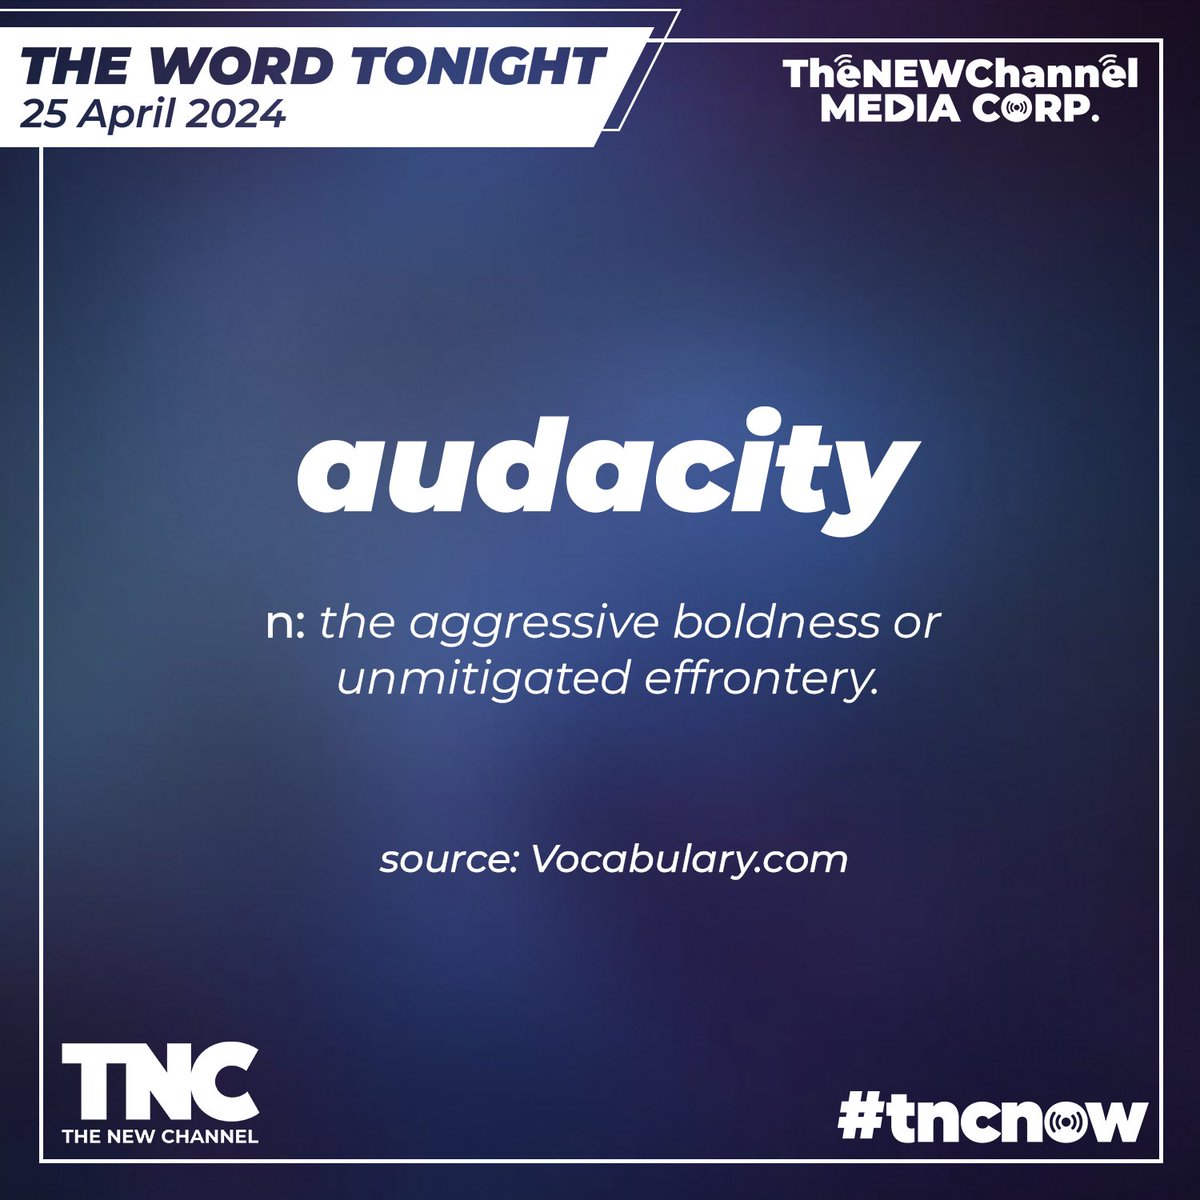 The Word Tonight

25 April 2024

audacity
/ɔˈdæsədi/

Noun

aggressive boldness or unmitigated effrontery
“he had the audacity to question my decision”

Source: Find out how strong your vocabulary is and learn new words at Vocabulary.com.

#onTNC #Audacity